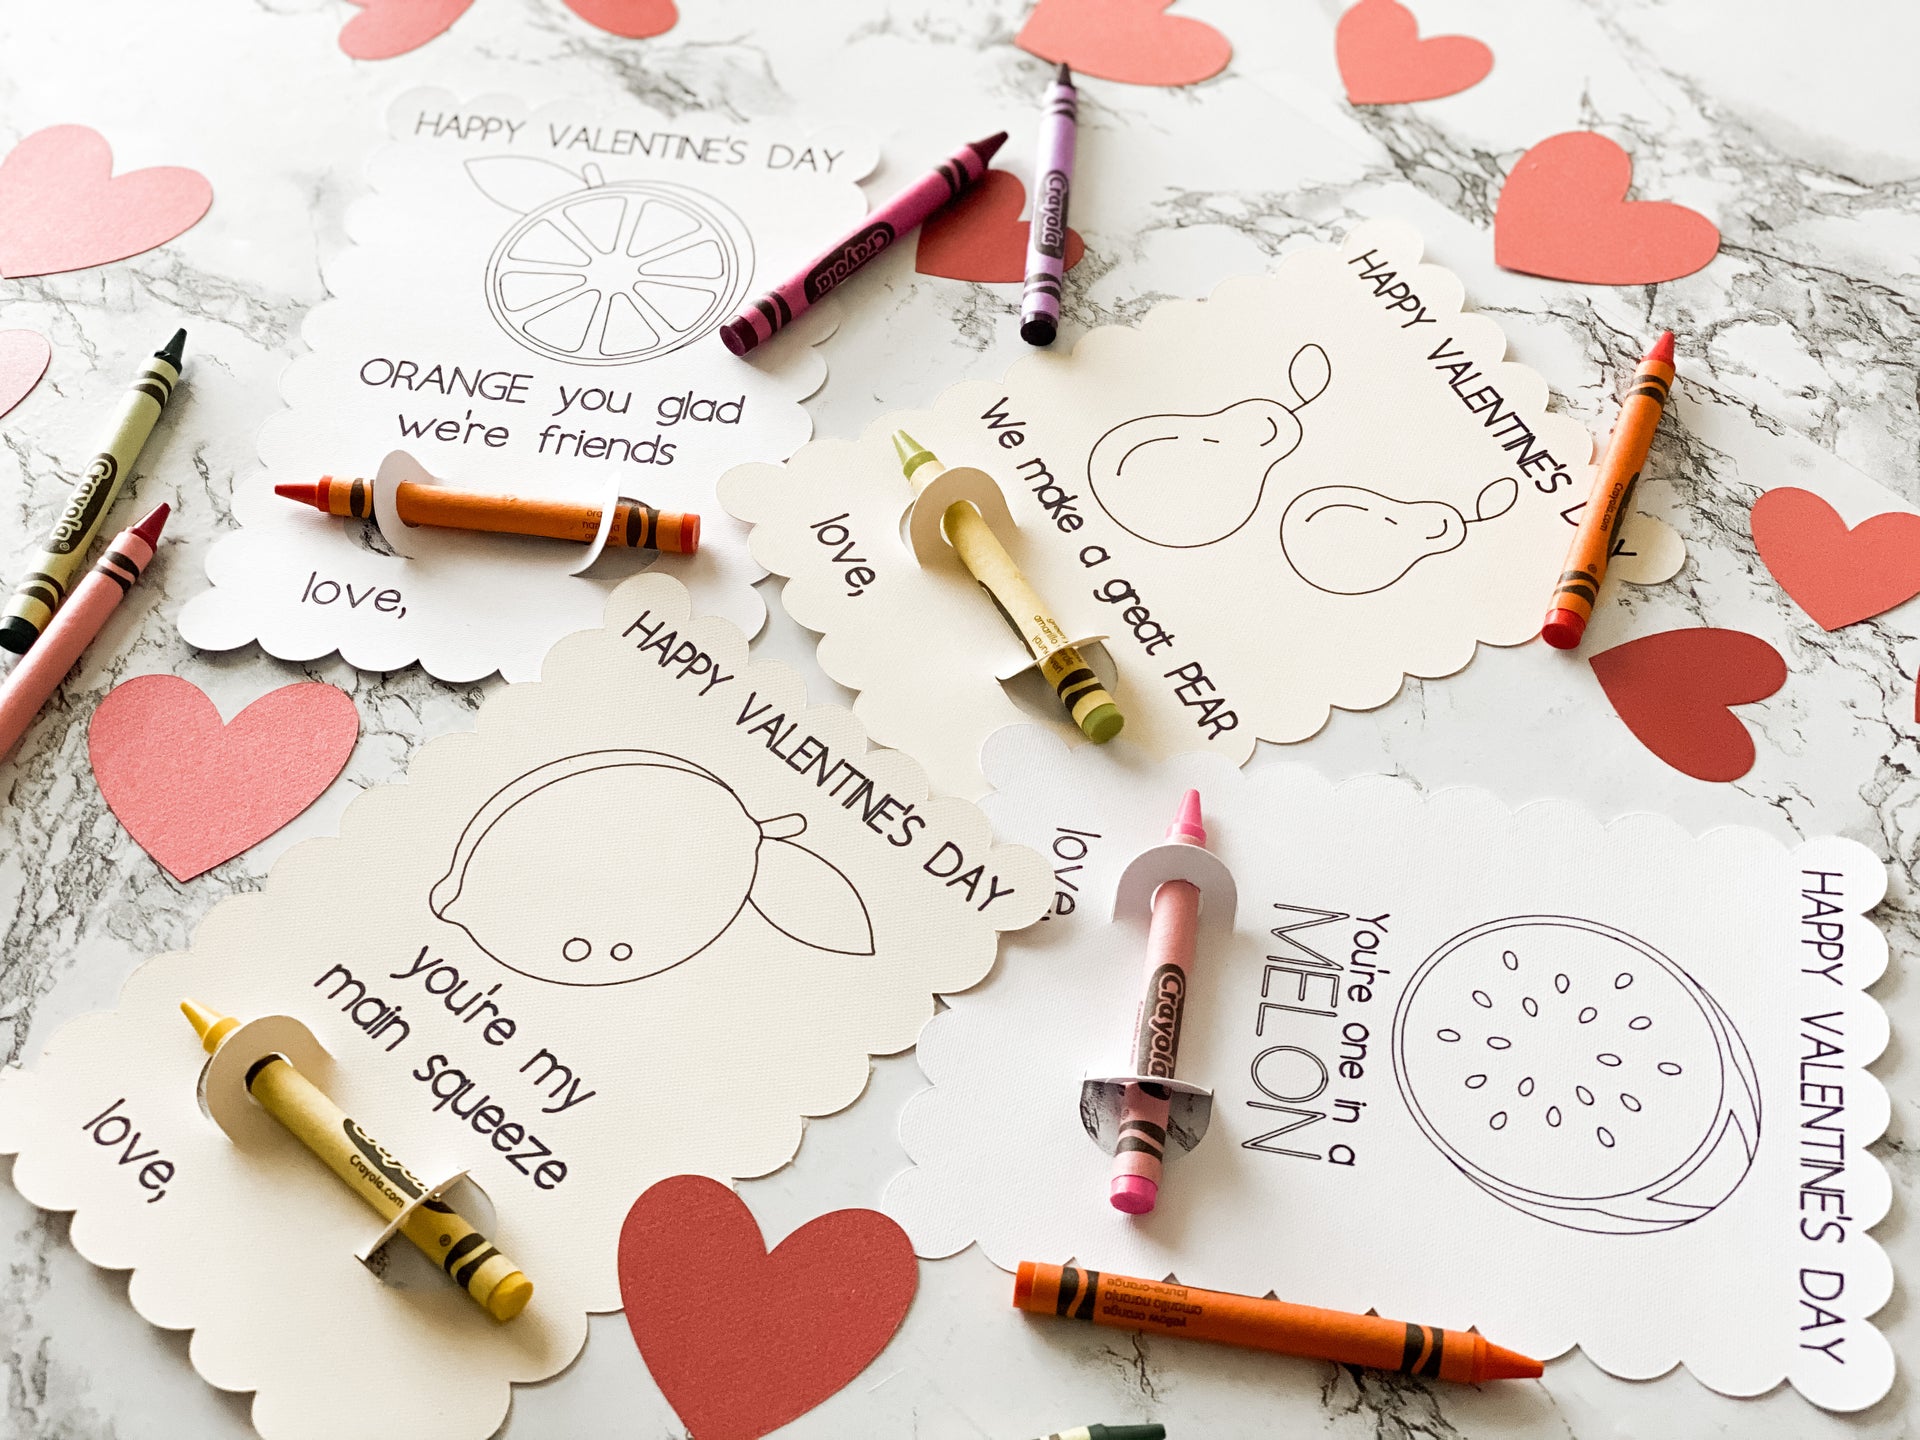 Cricut Valentine's Day Cards for Kids